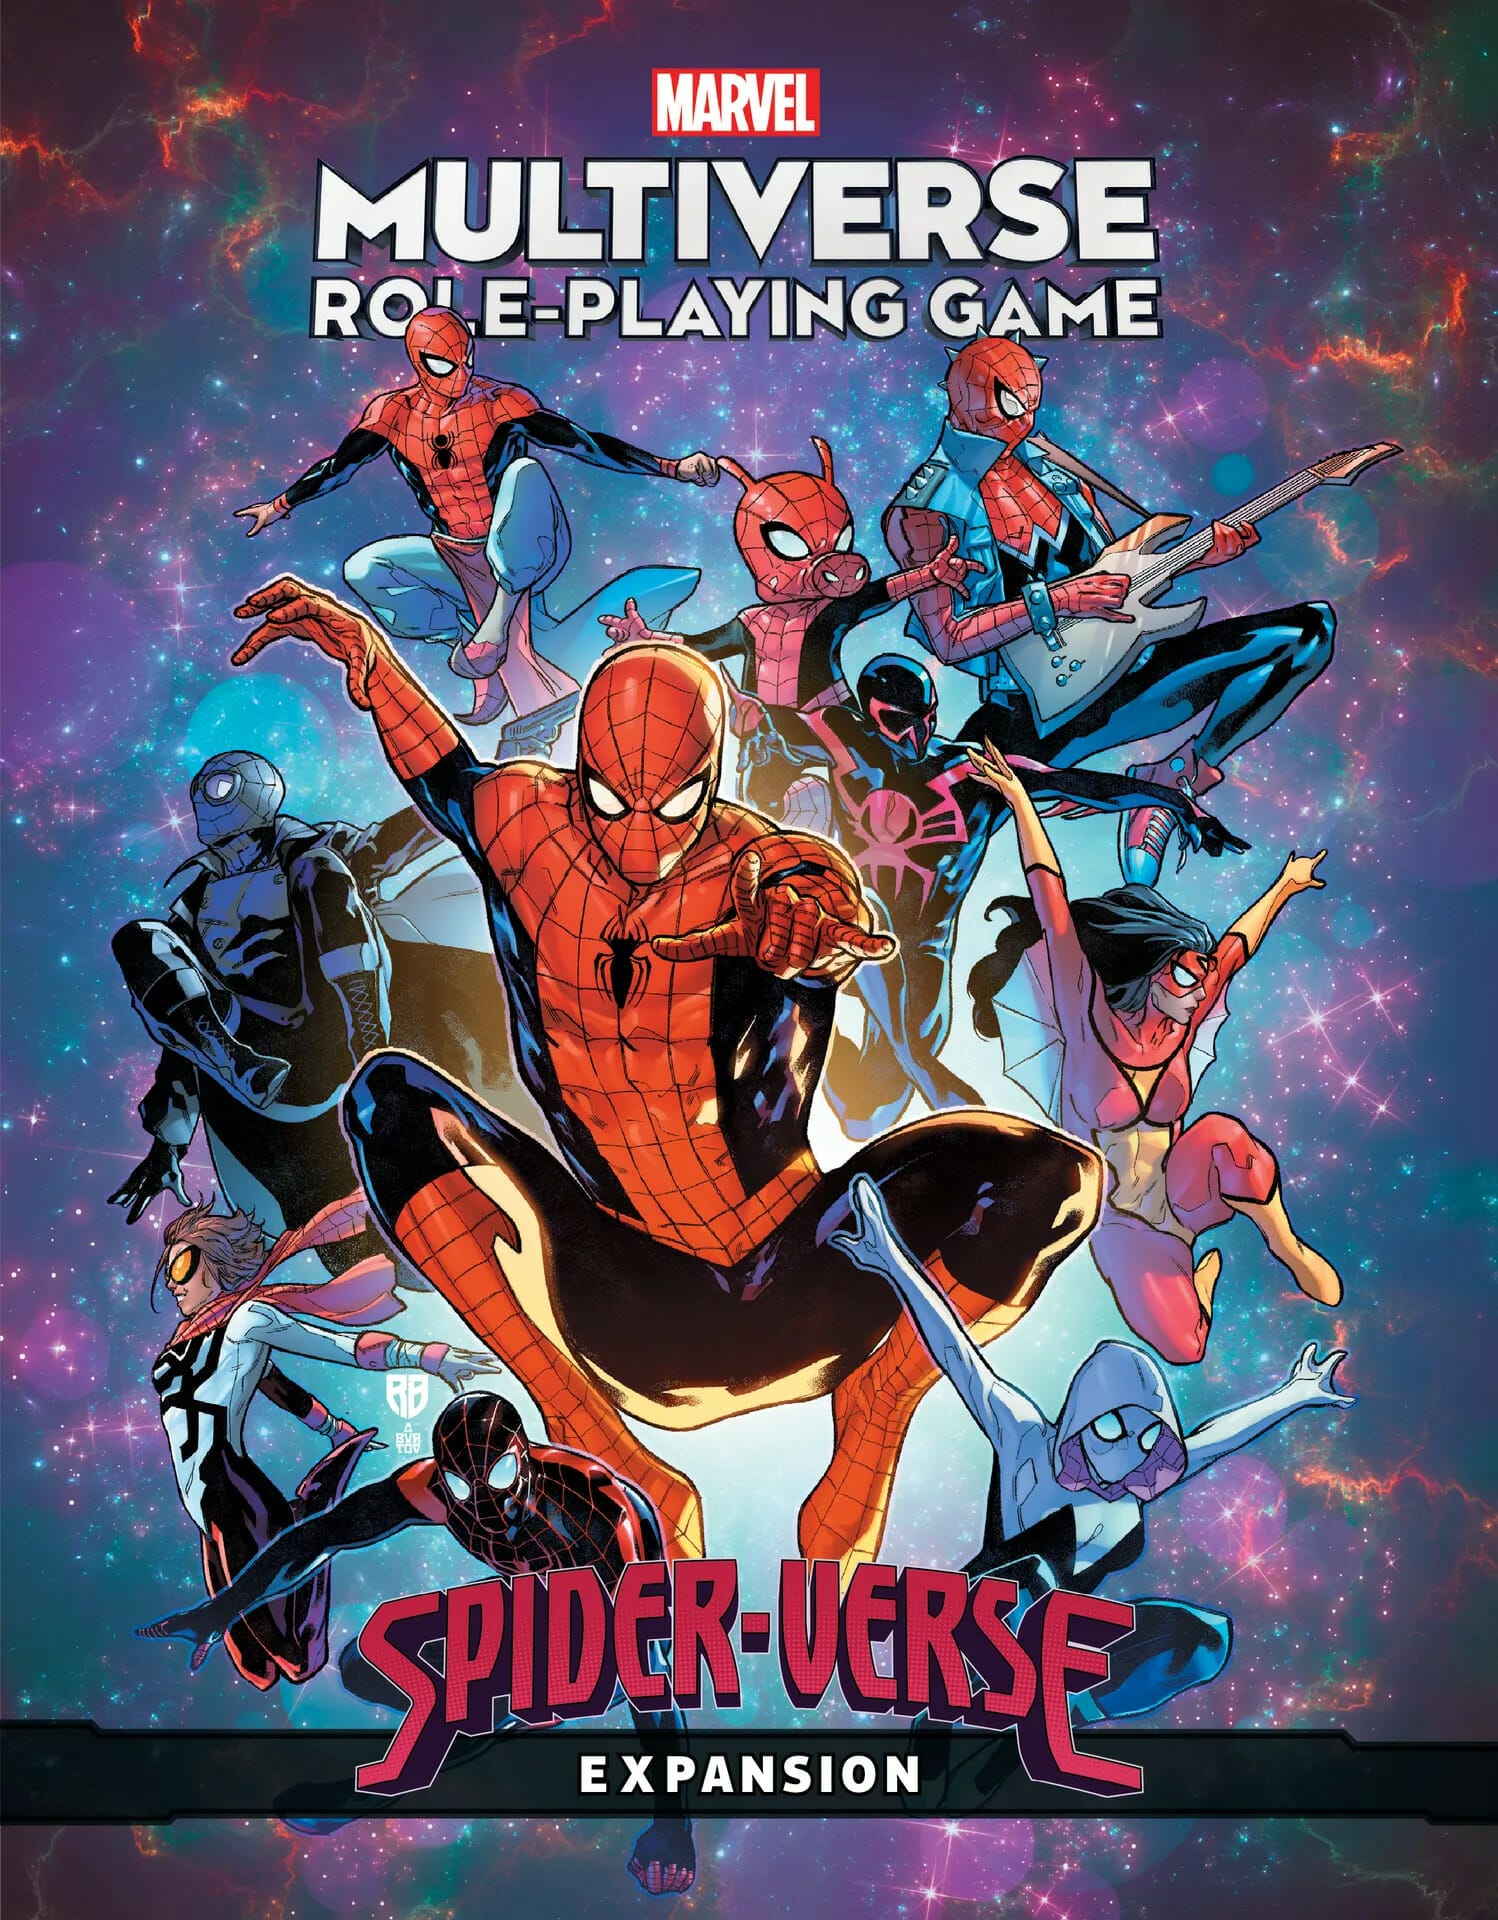 Spider-Verse Expansion cover showing many Spider-man heroes. 